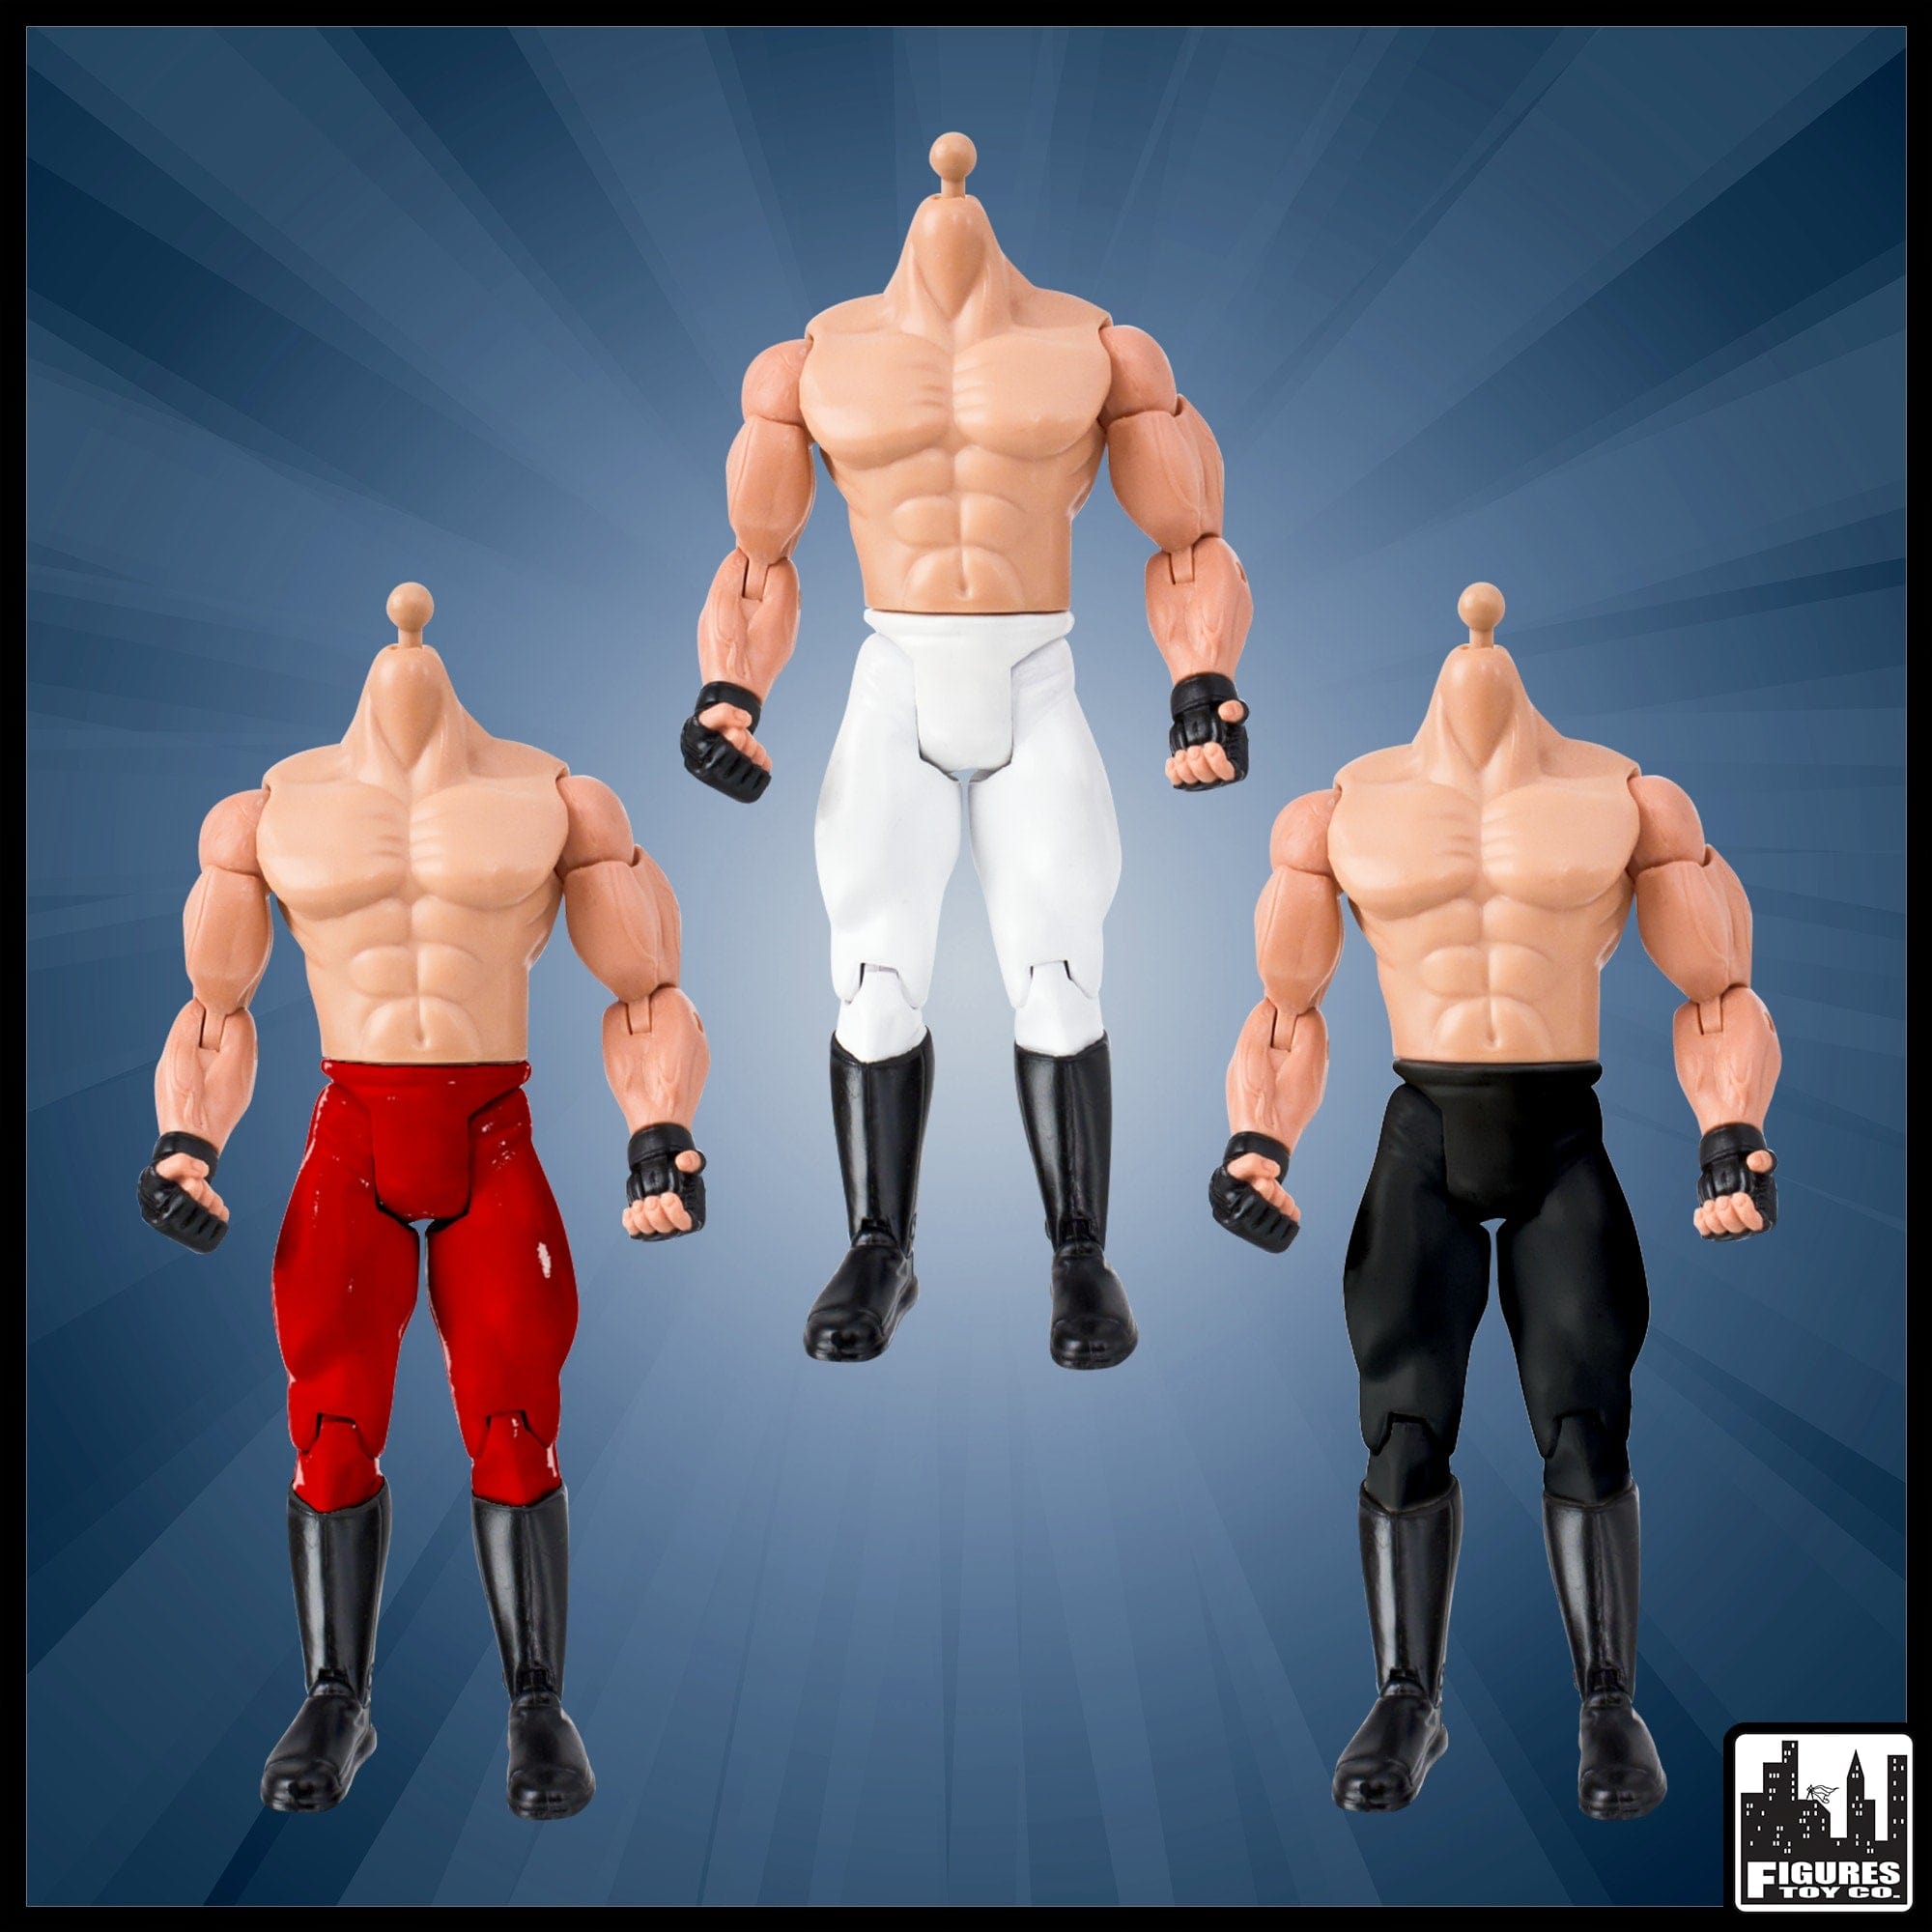 Generic 7 Inch Wrestling Action Figure With White Suit Body